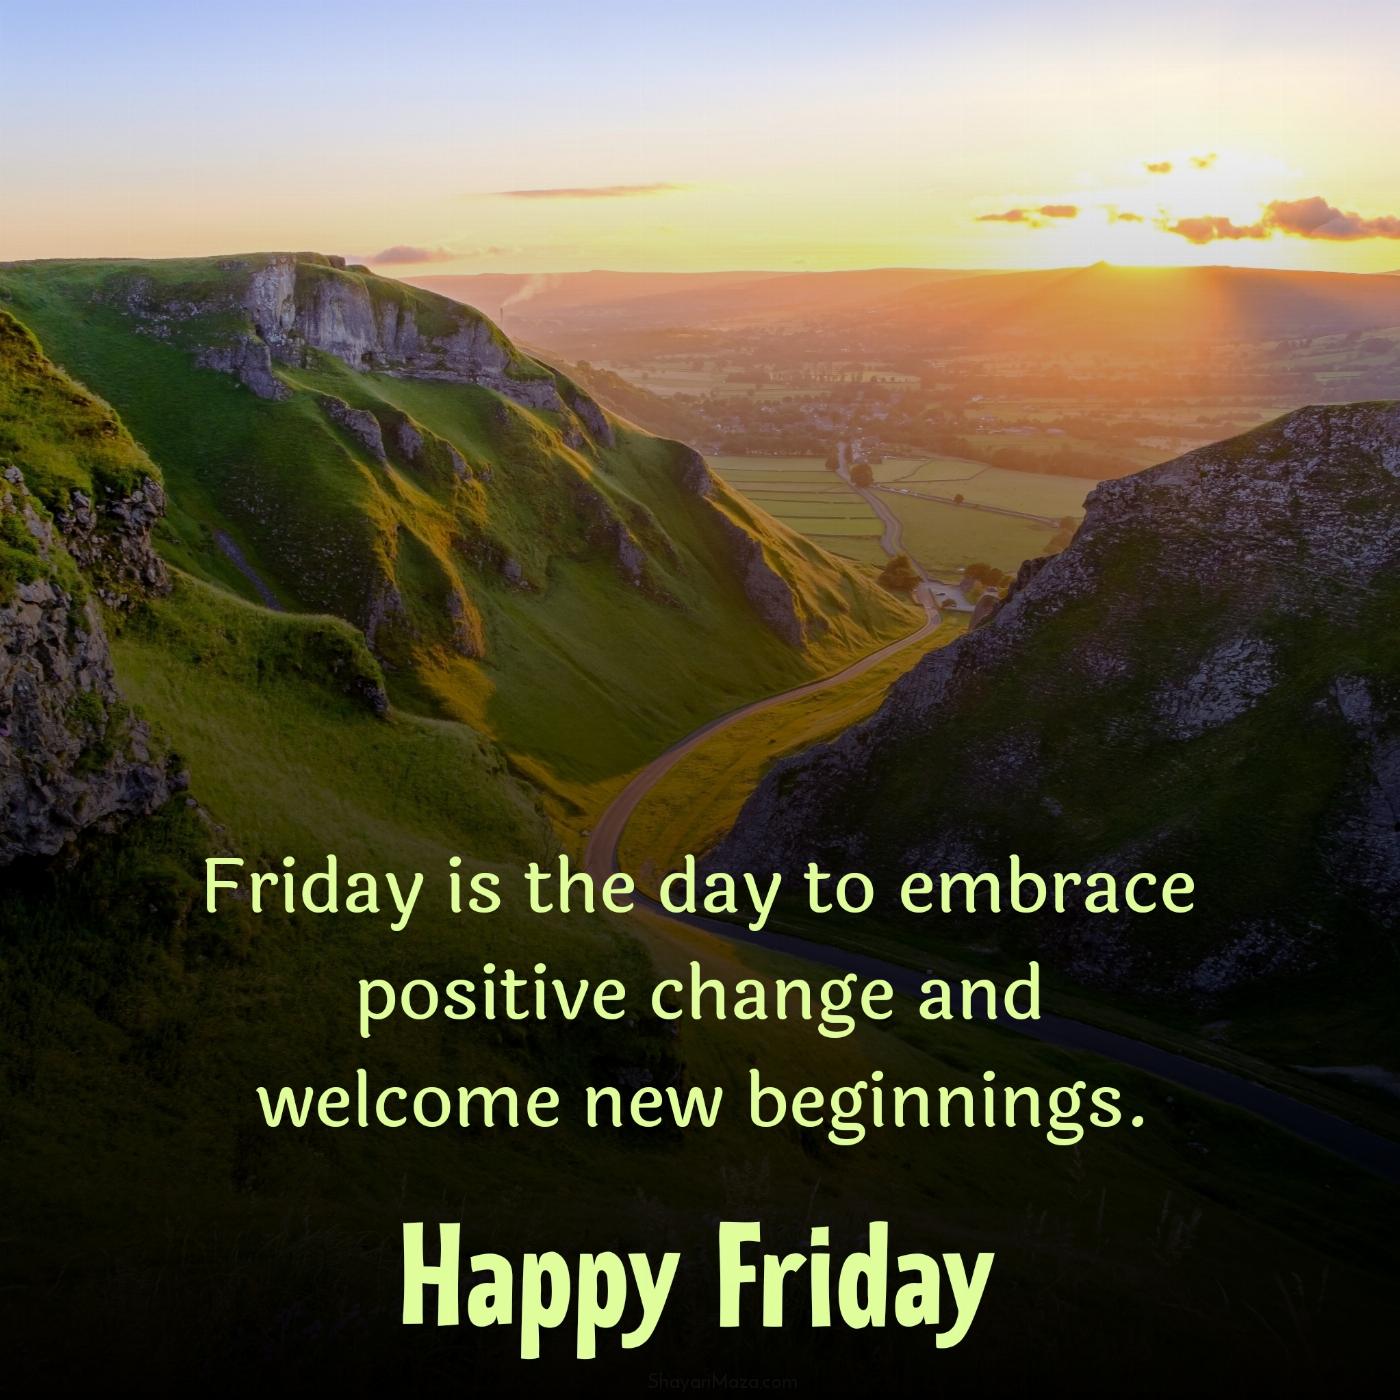 Friday is the day to embrace positive change and welcome new beginnings